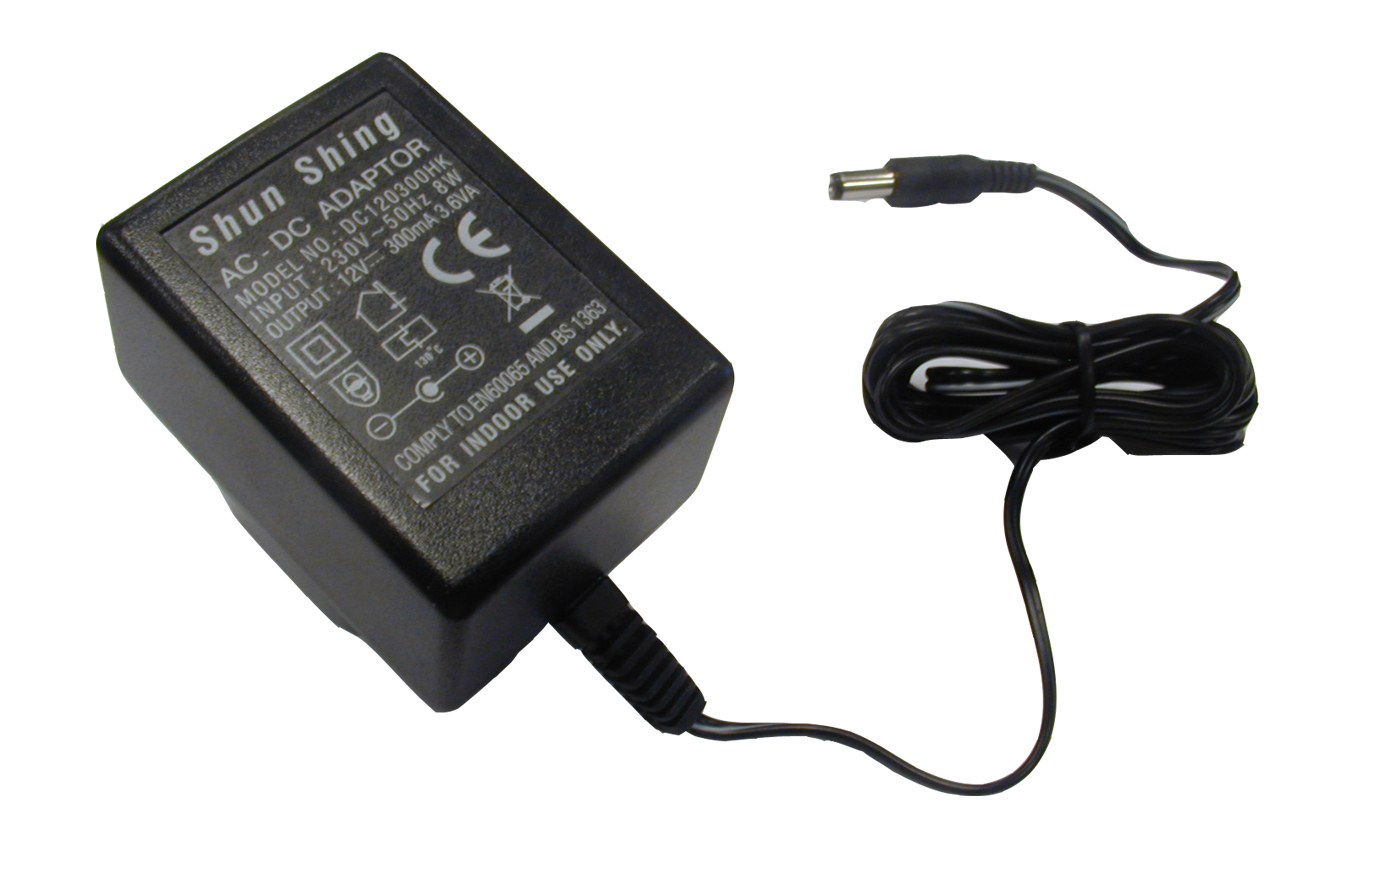 Signolux/Lisa Pager SWING/Infralight/Radiolight Charger/Adaptor